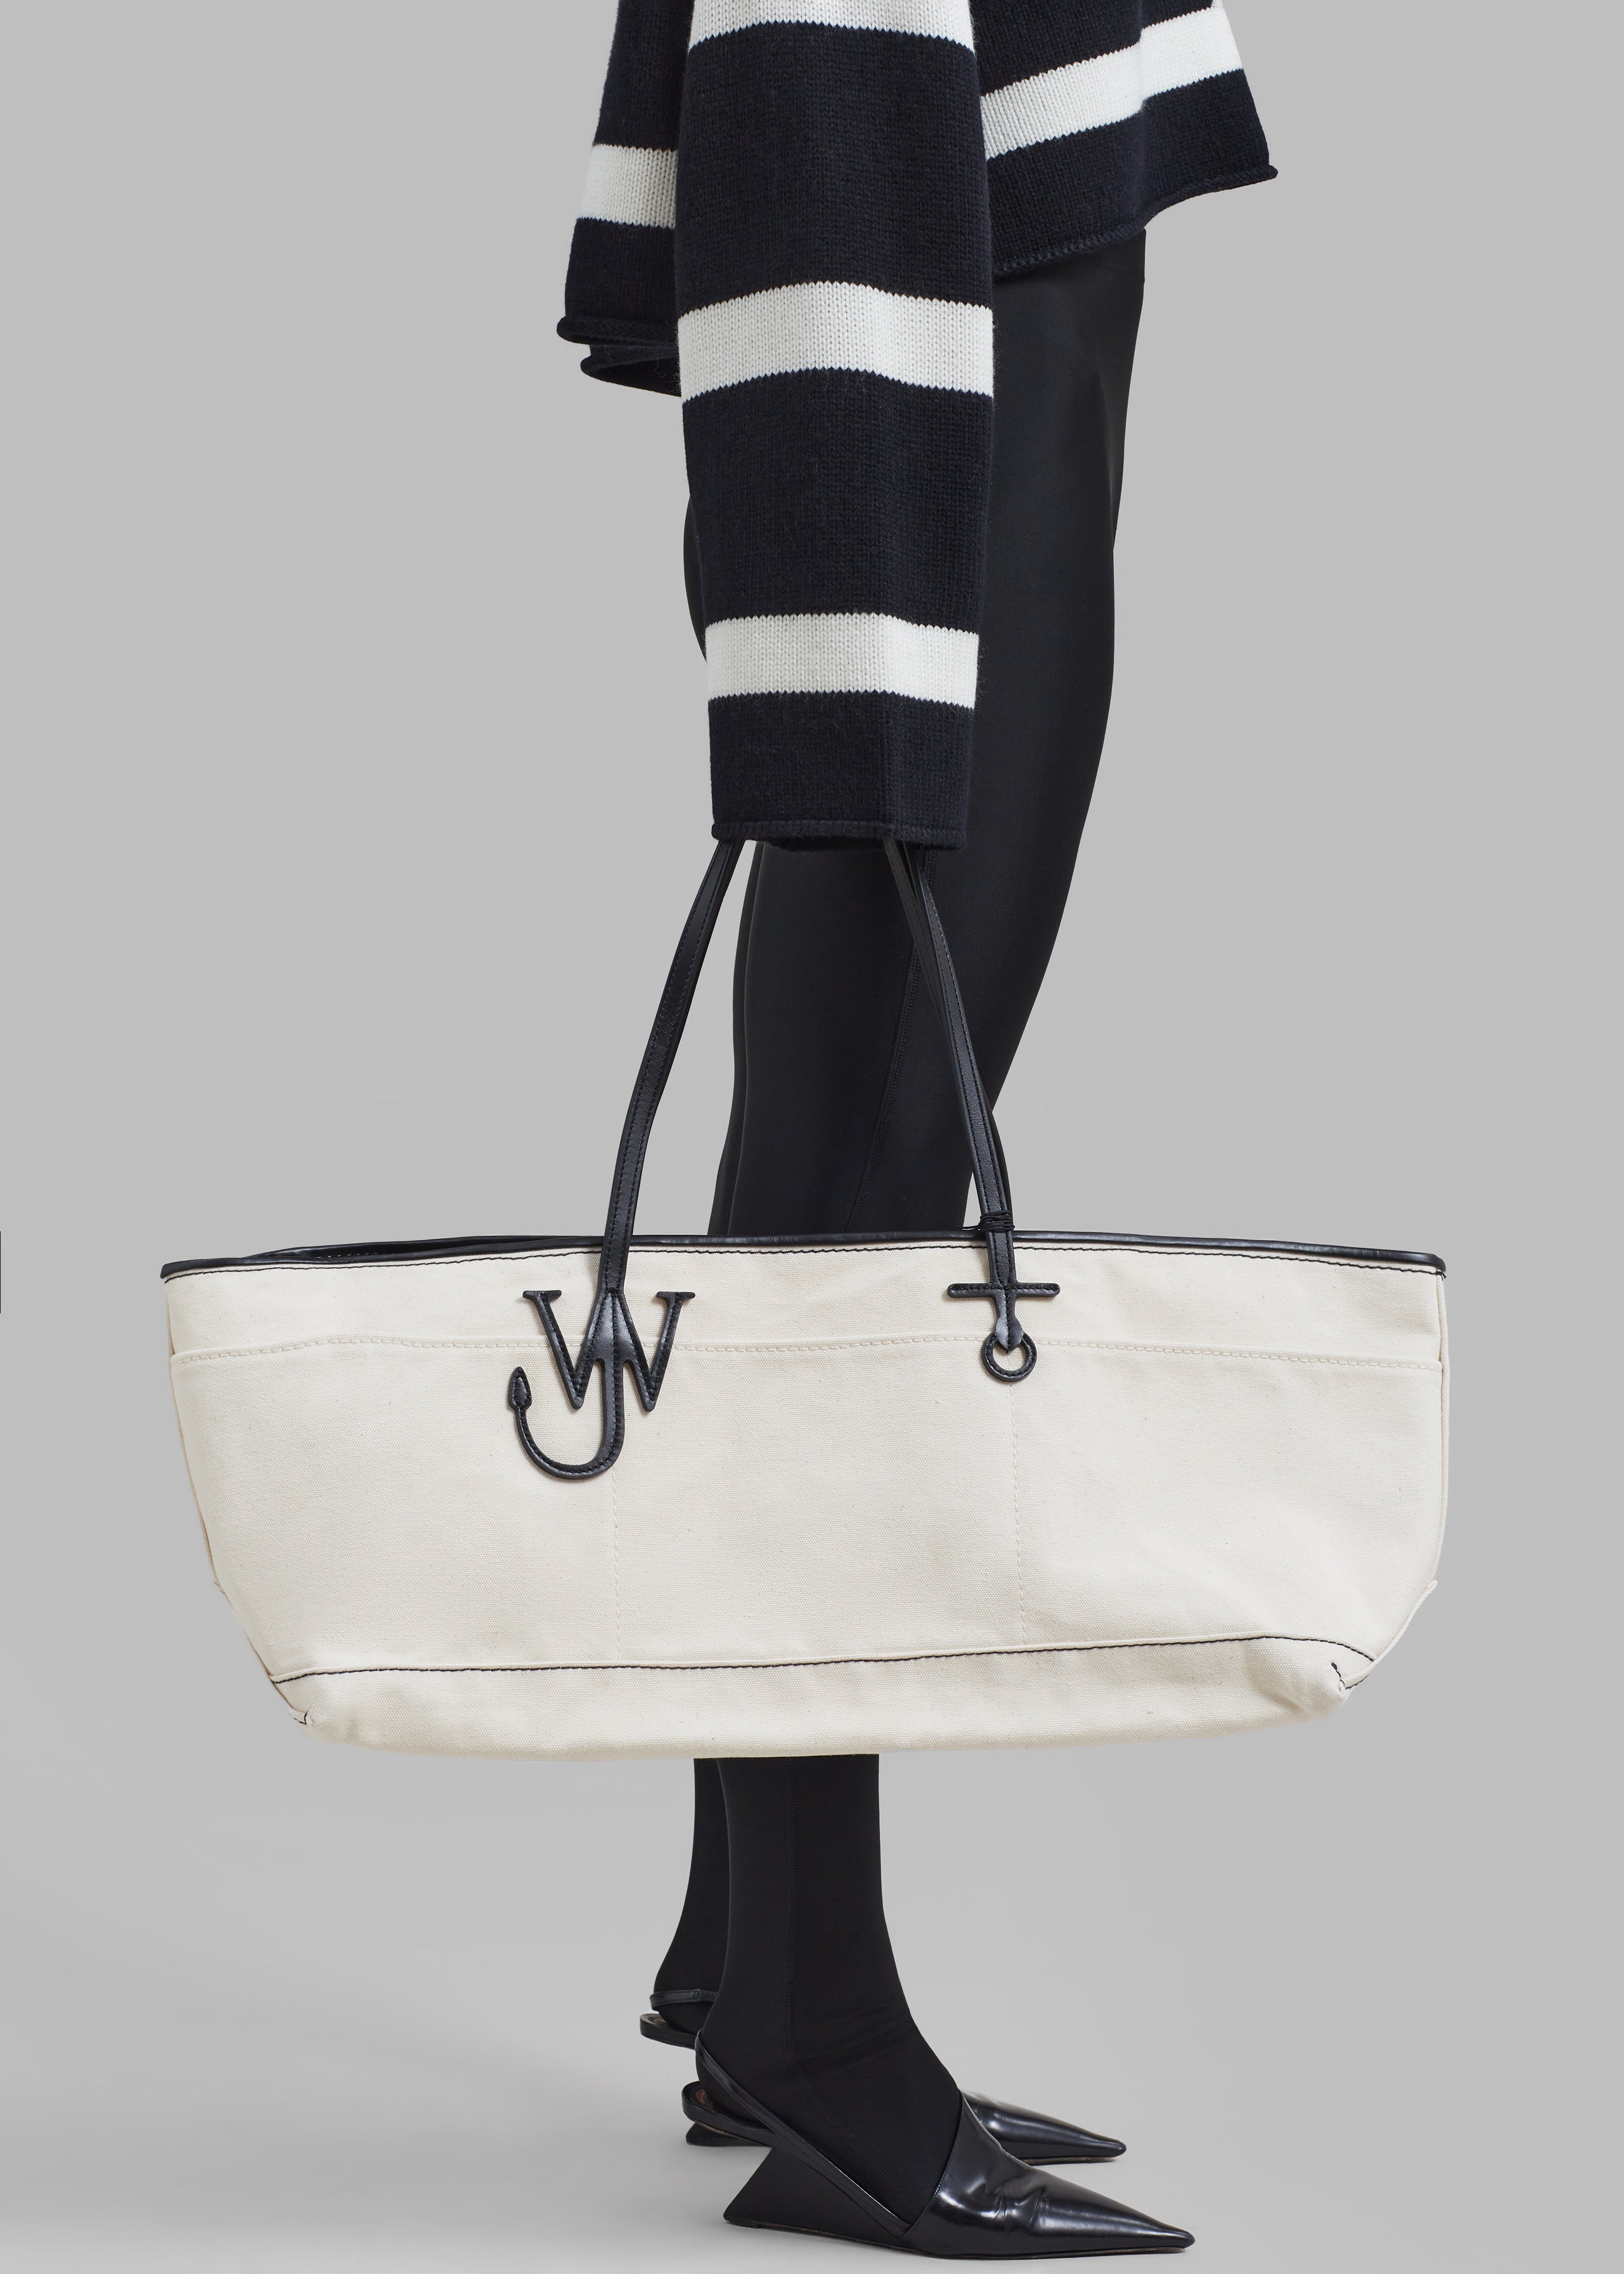 JW Anderson Anchor Stretch Tote - Natural/Black - 6